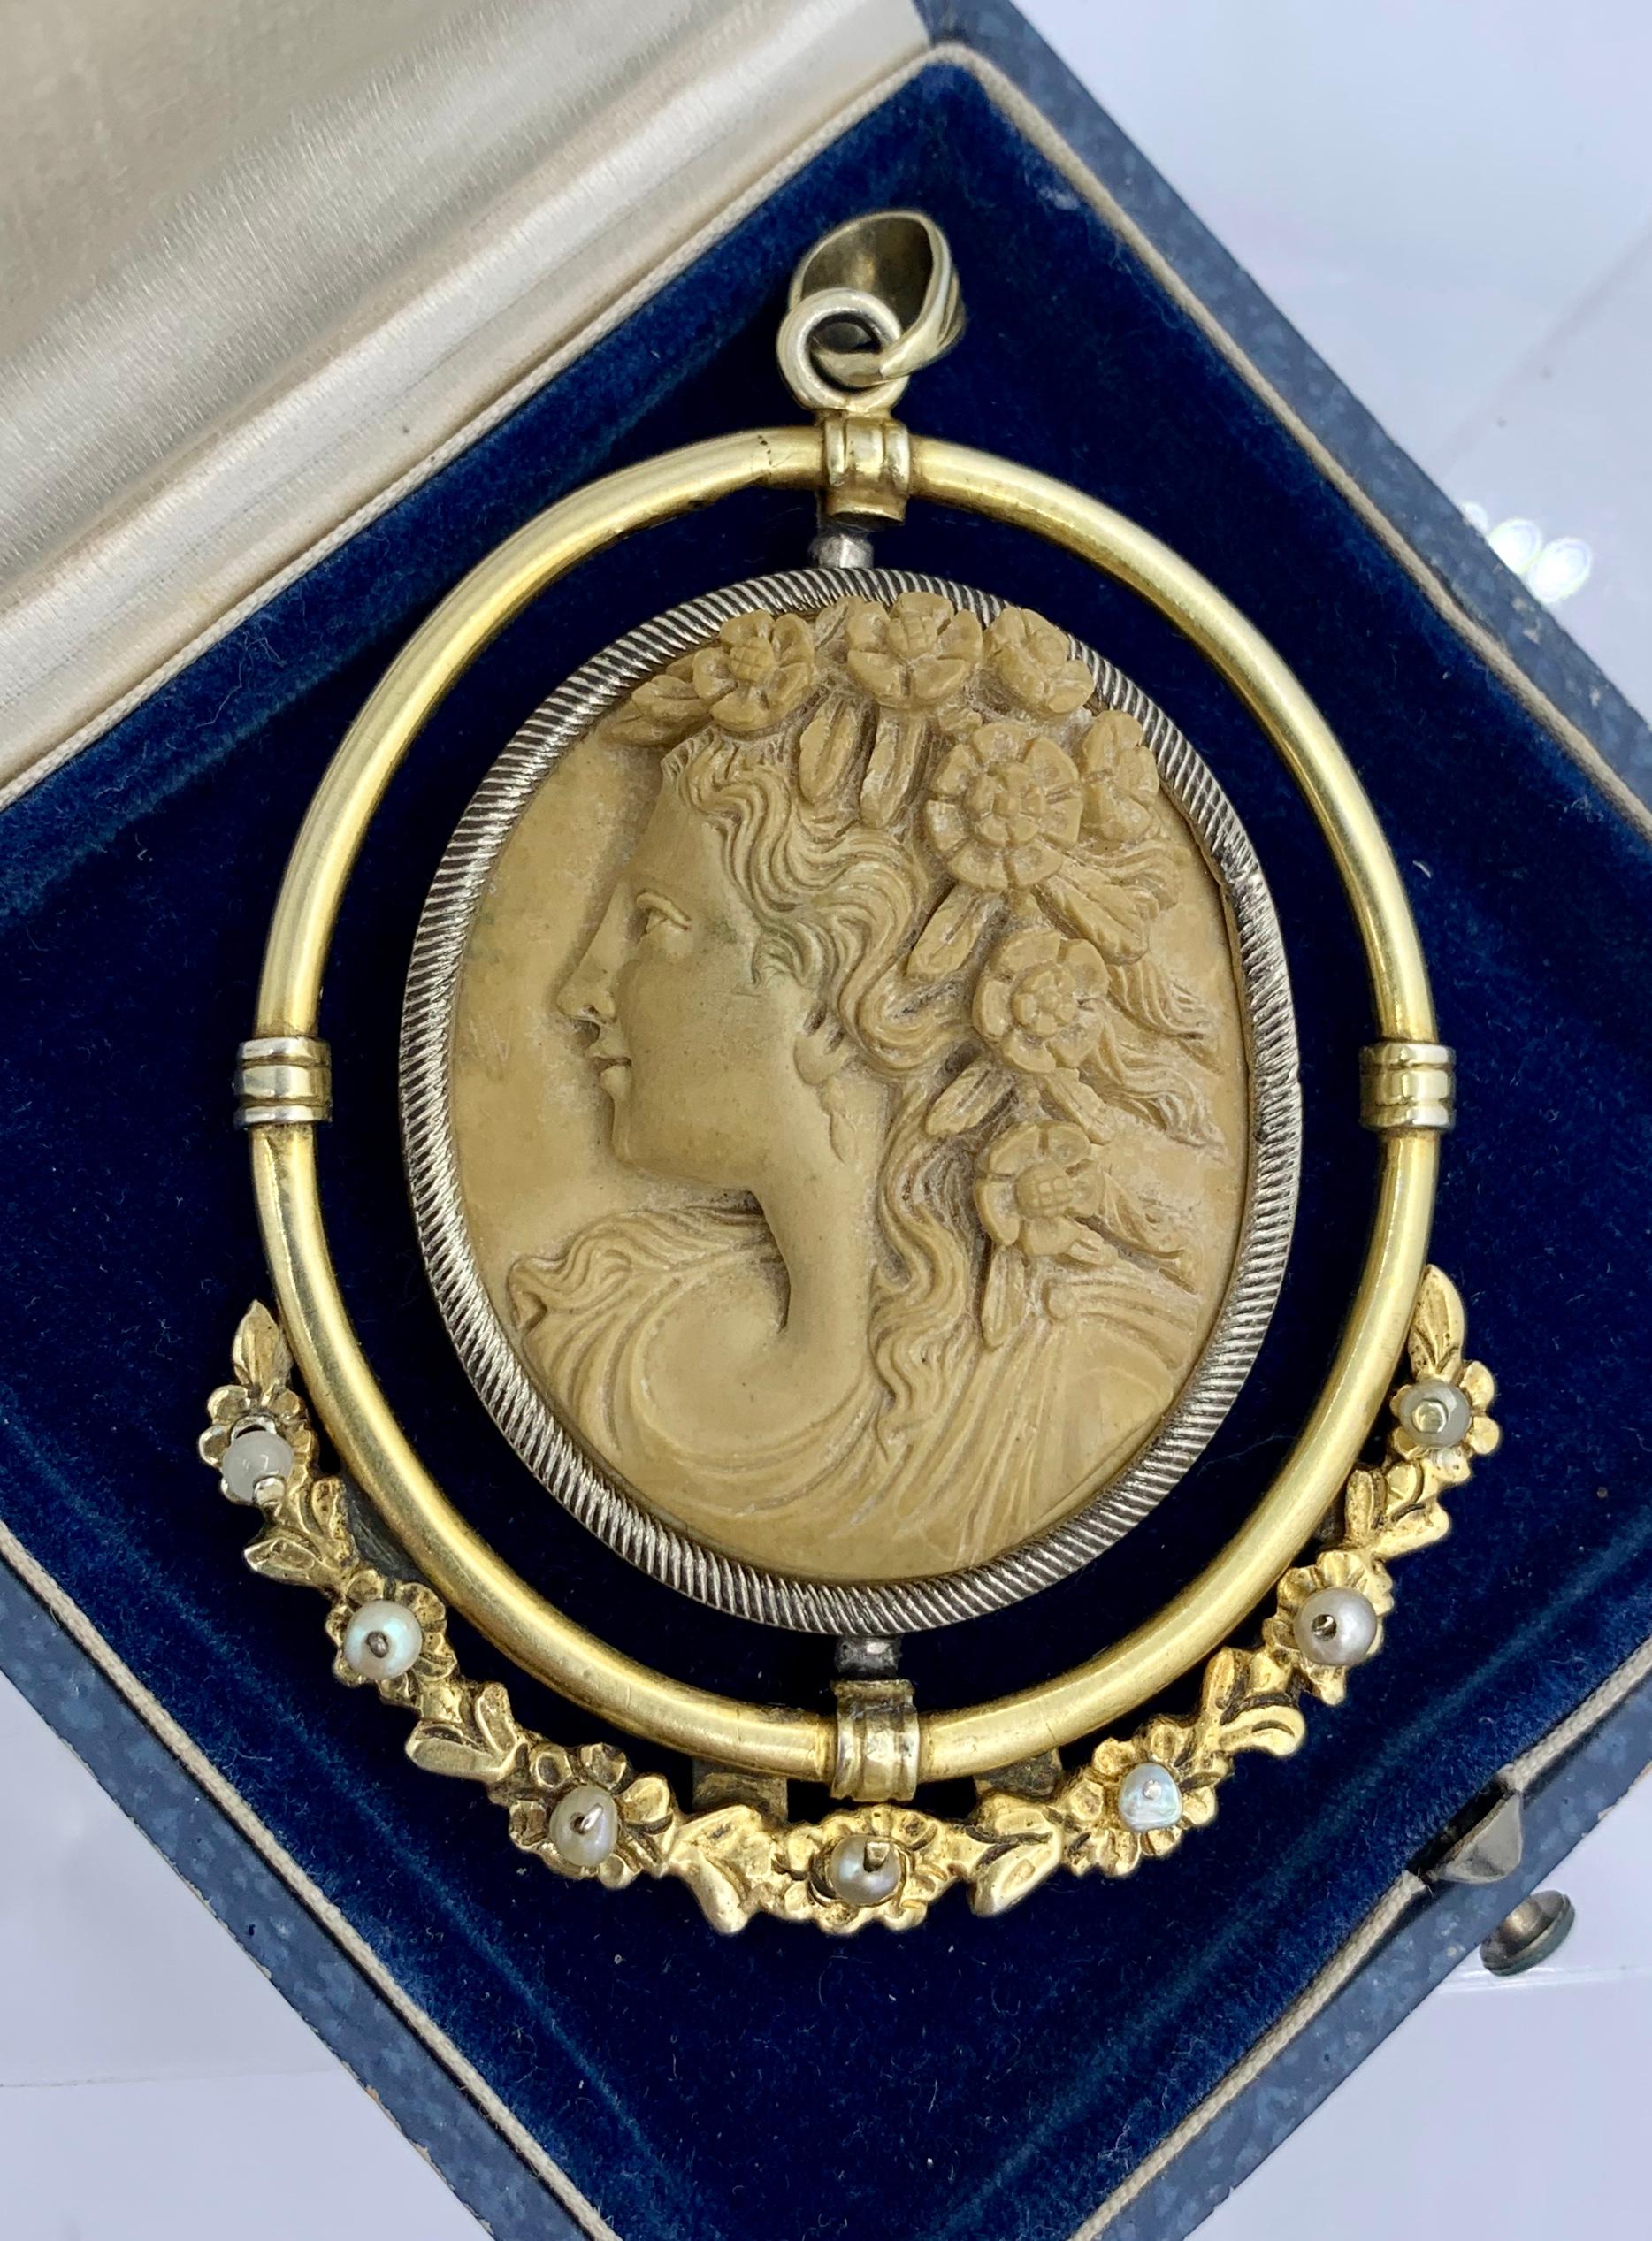 This is a spectacular and very rare monumental antique Art Deco - Victorian - Belle Epoque Lava Cameo Pendant Necklace with a magnificent deeply carved lava cameo of a woman with spectacular flower adornments in her flowing hair.  The cameo sets in